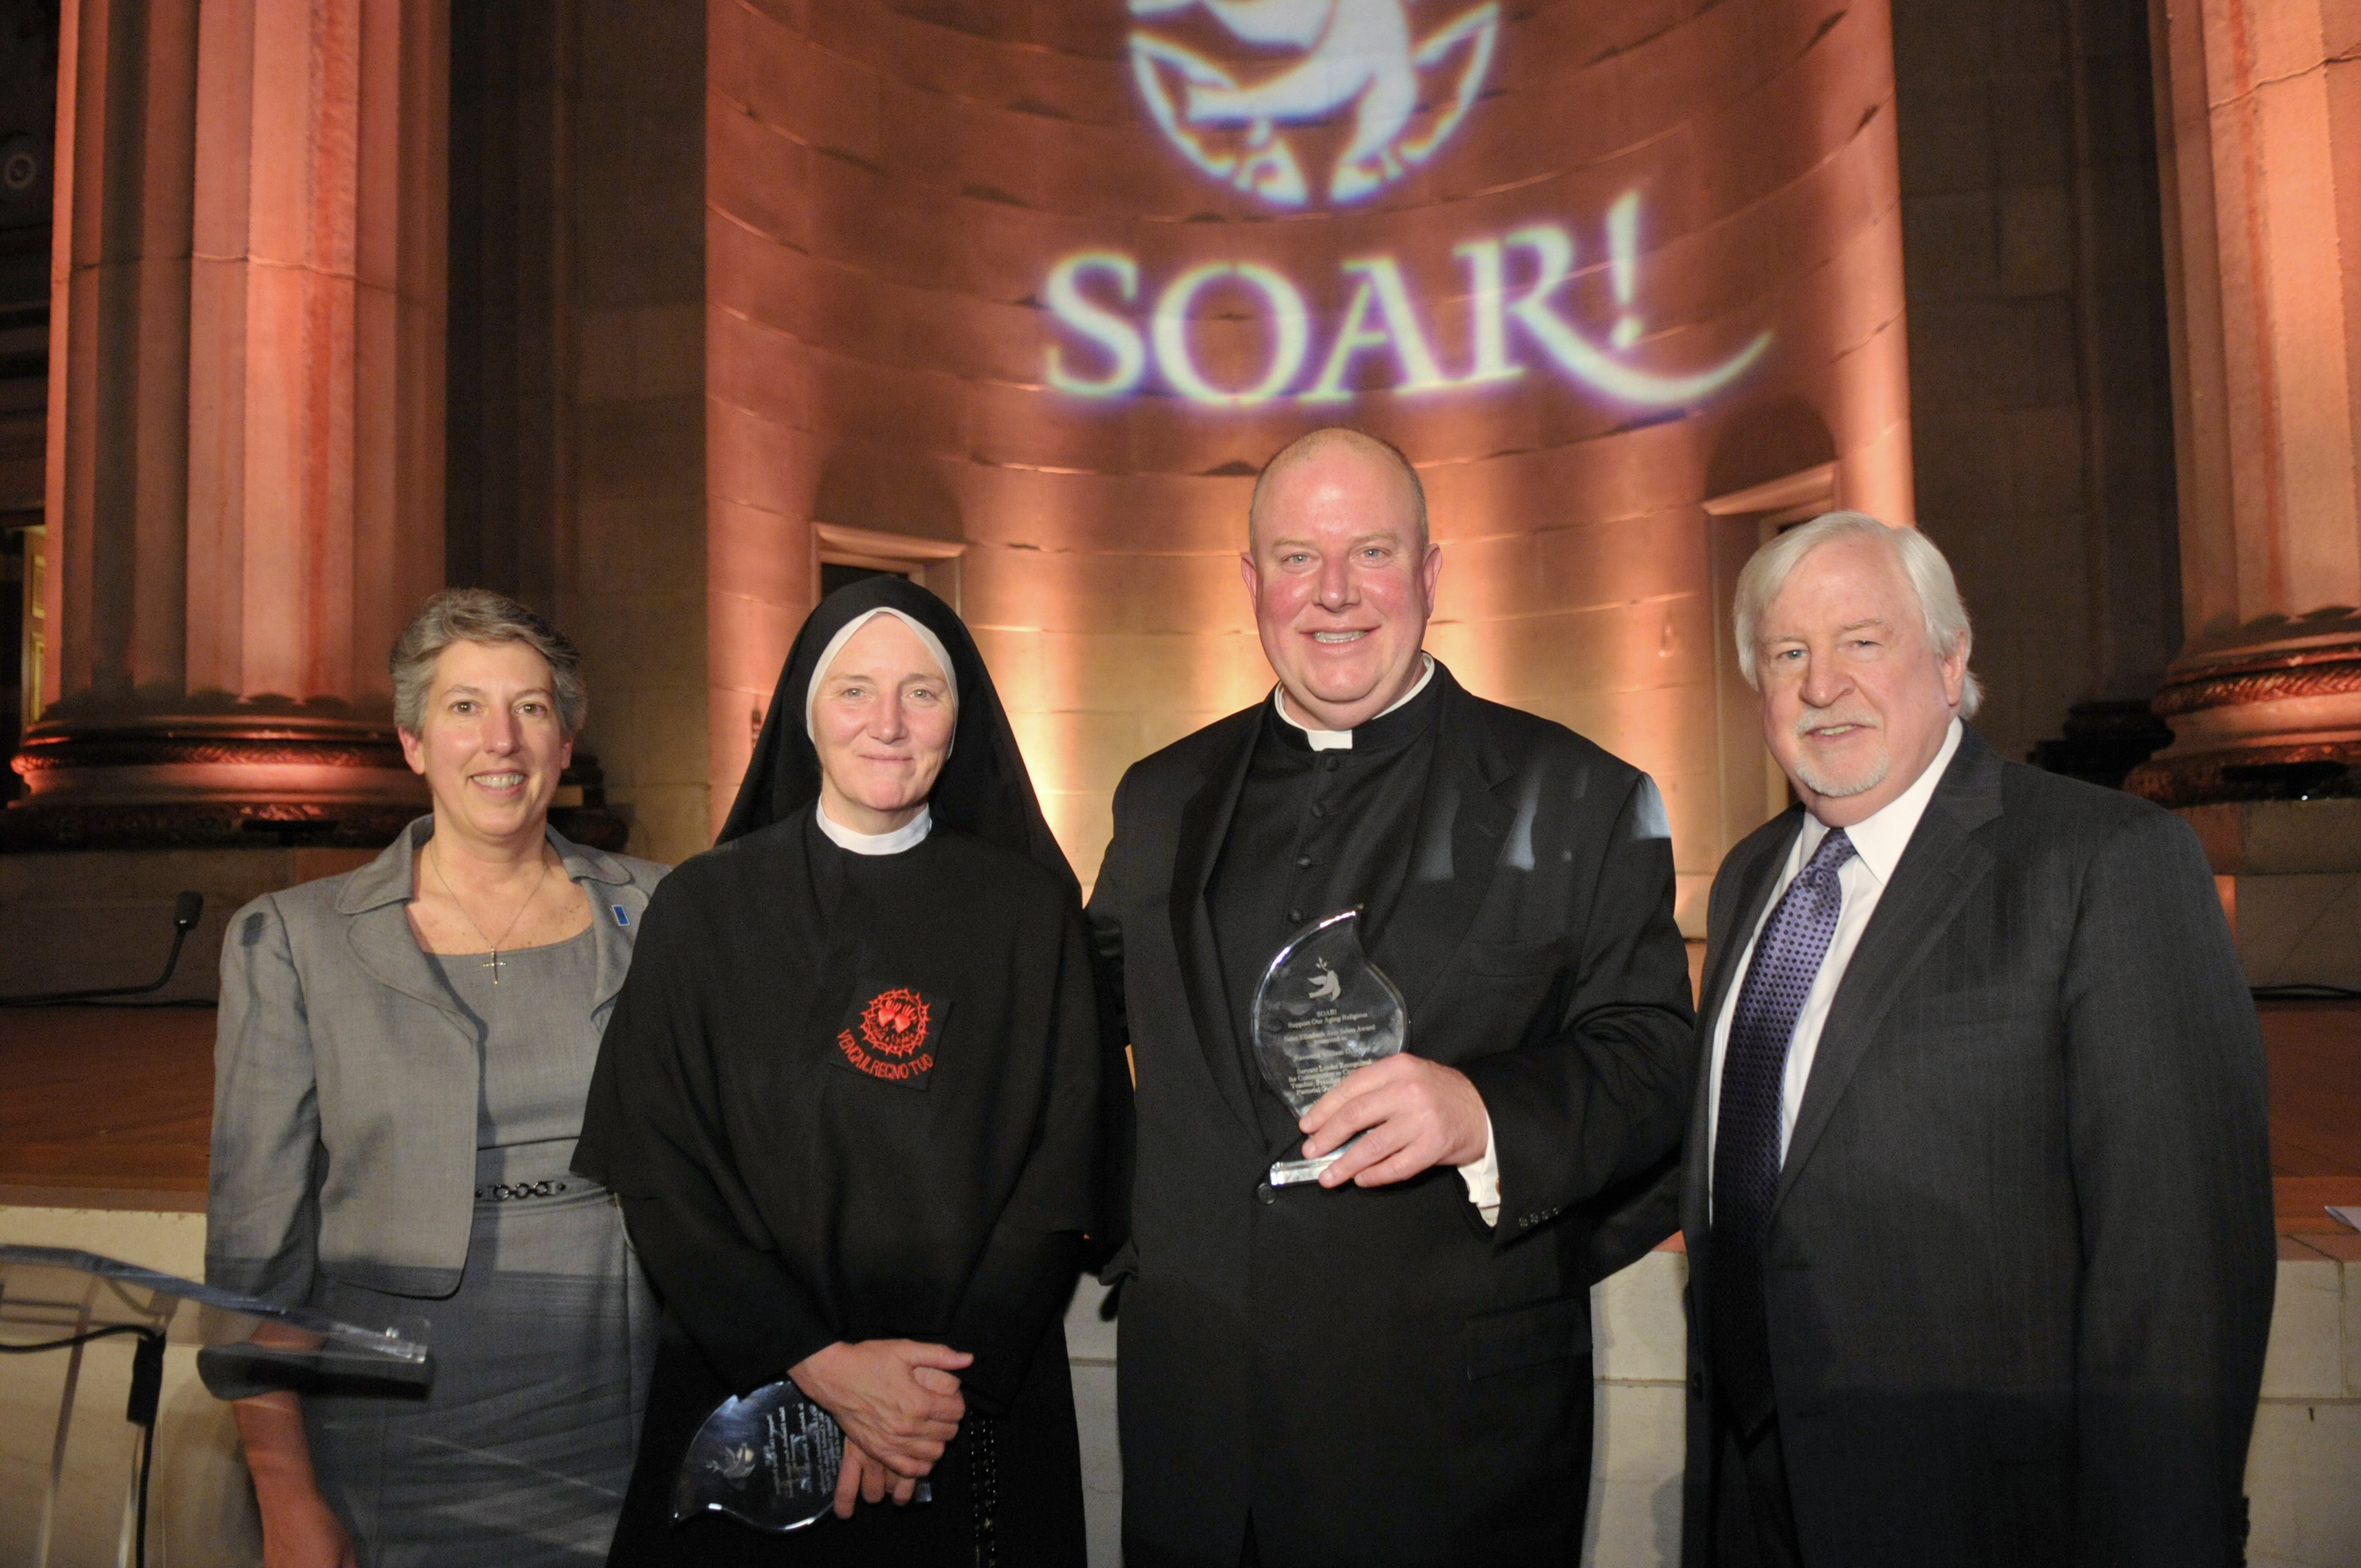 Brother and Sister Washingtonians Honored at 26th Annual SOAR! Dinner